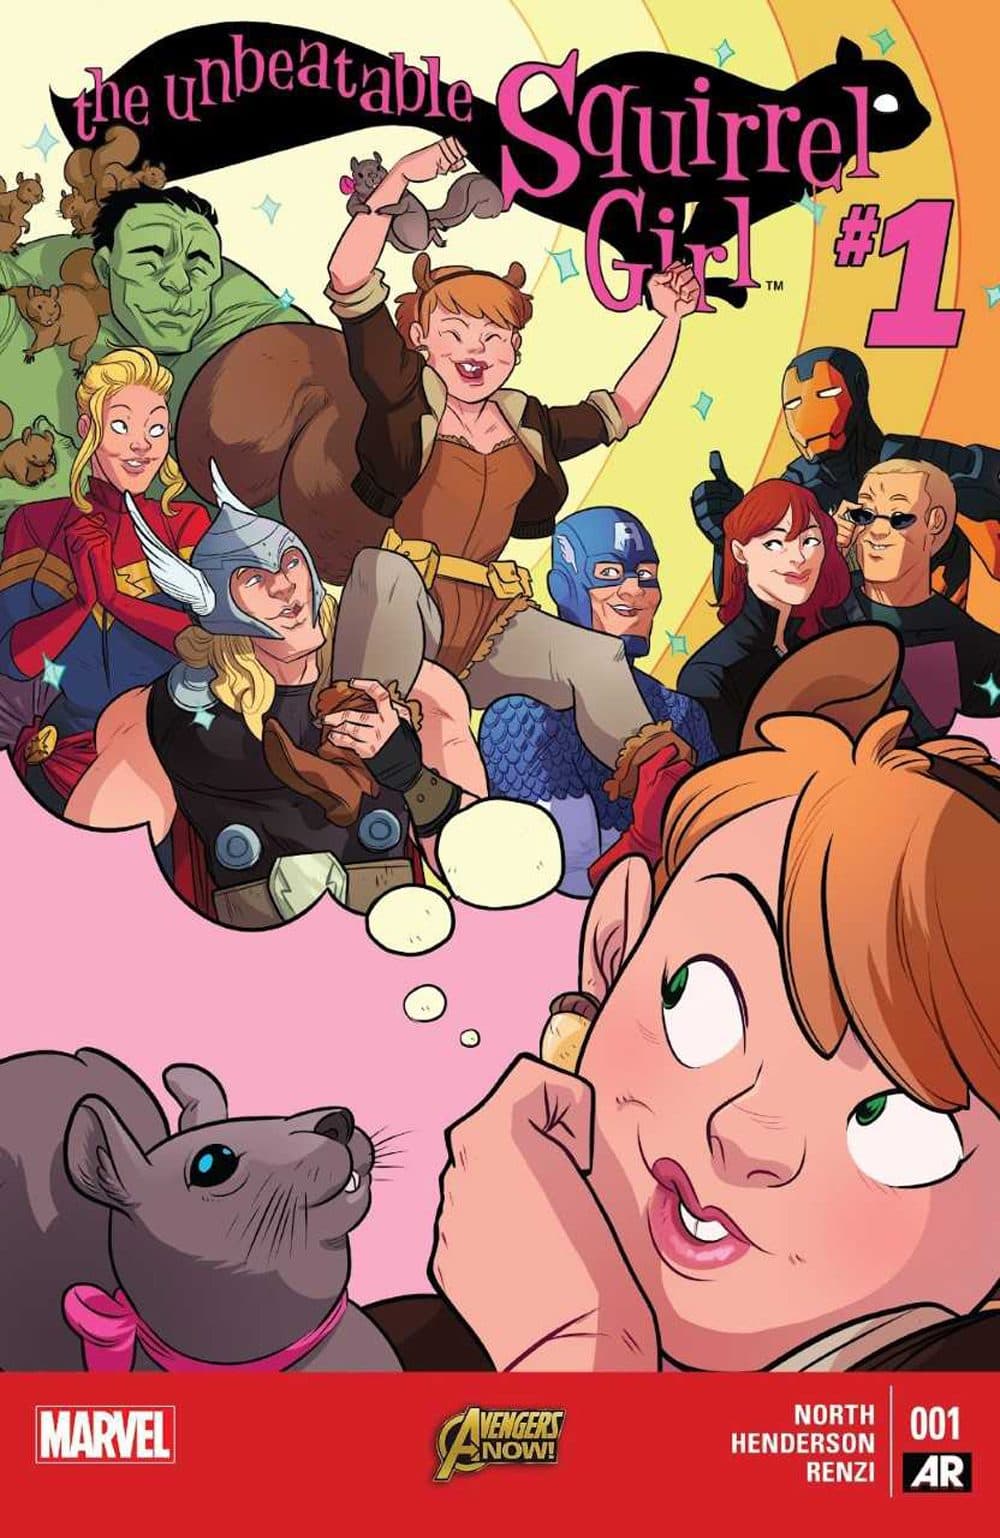 A cover of &quot;The Unbeatable Squirrel Girl&quot; (Courtesy Marvel Comics)